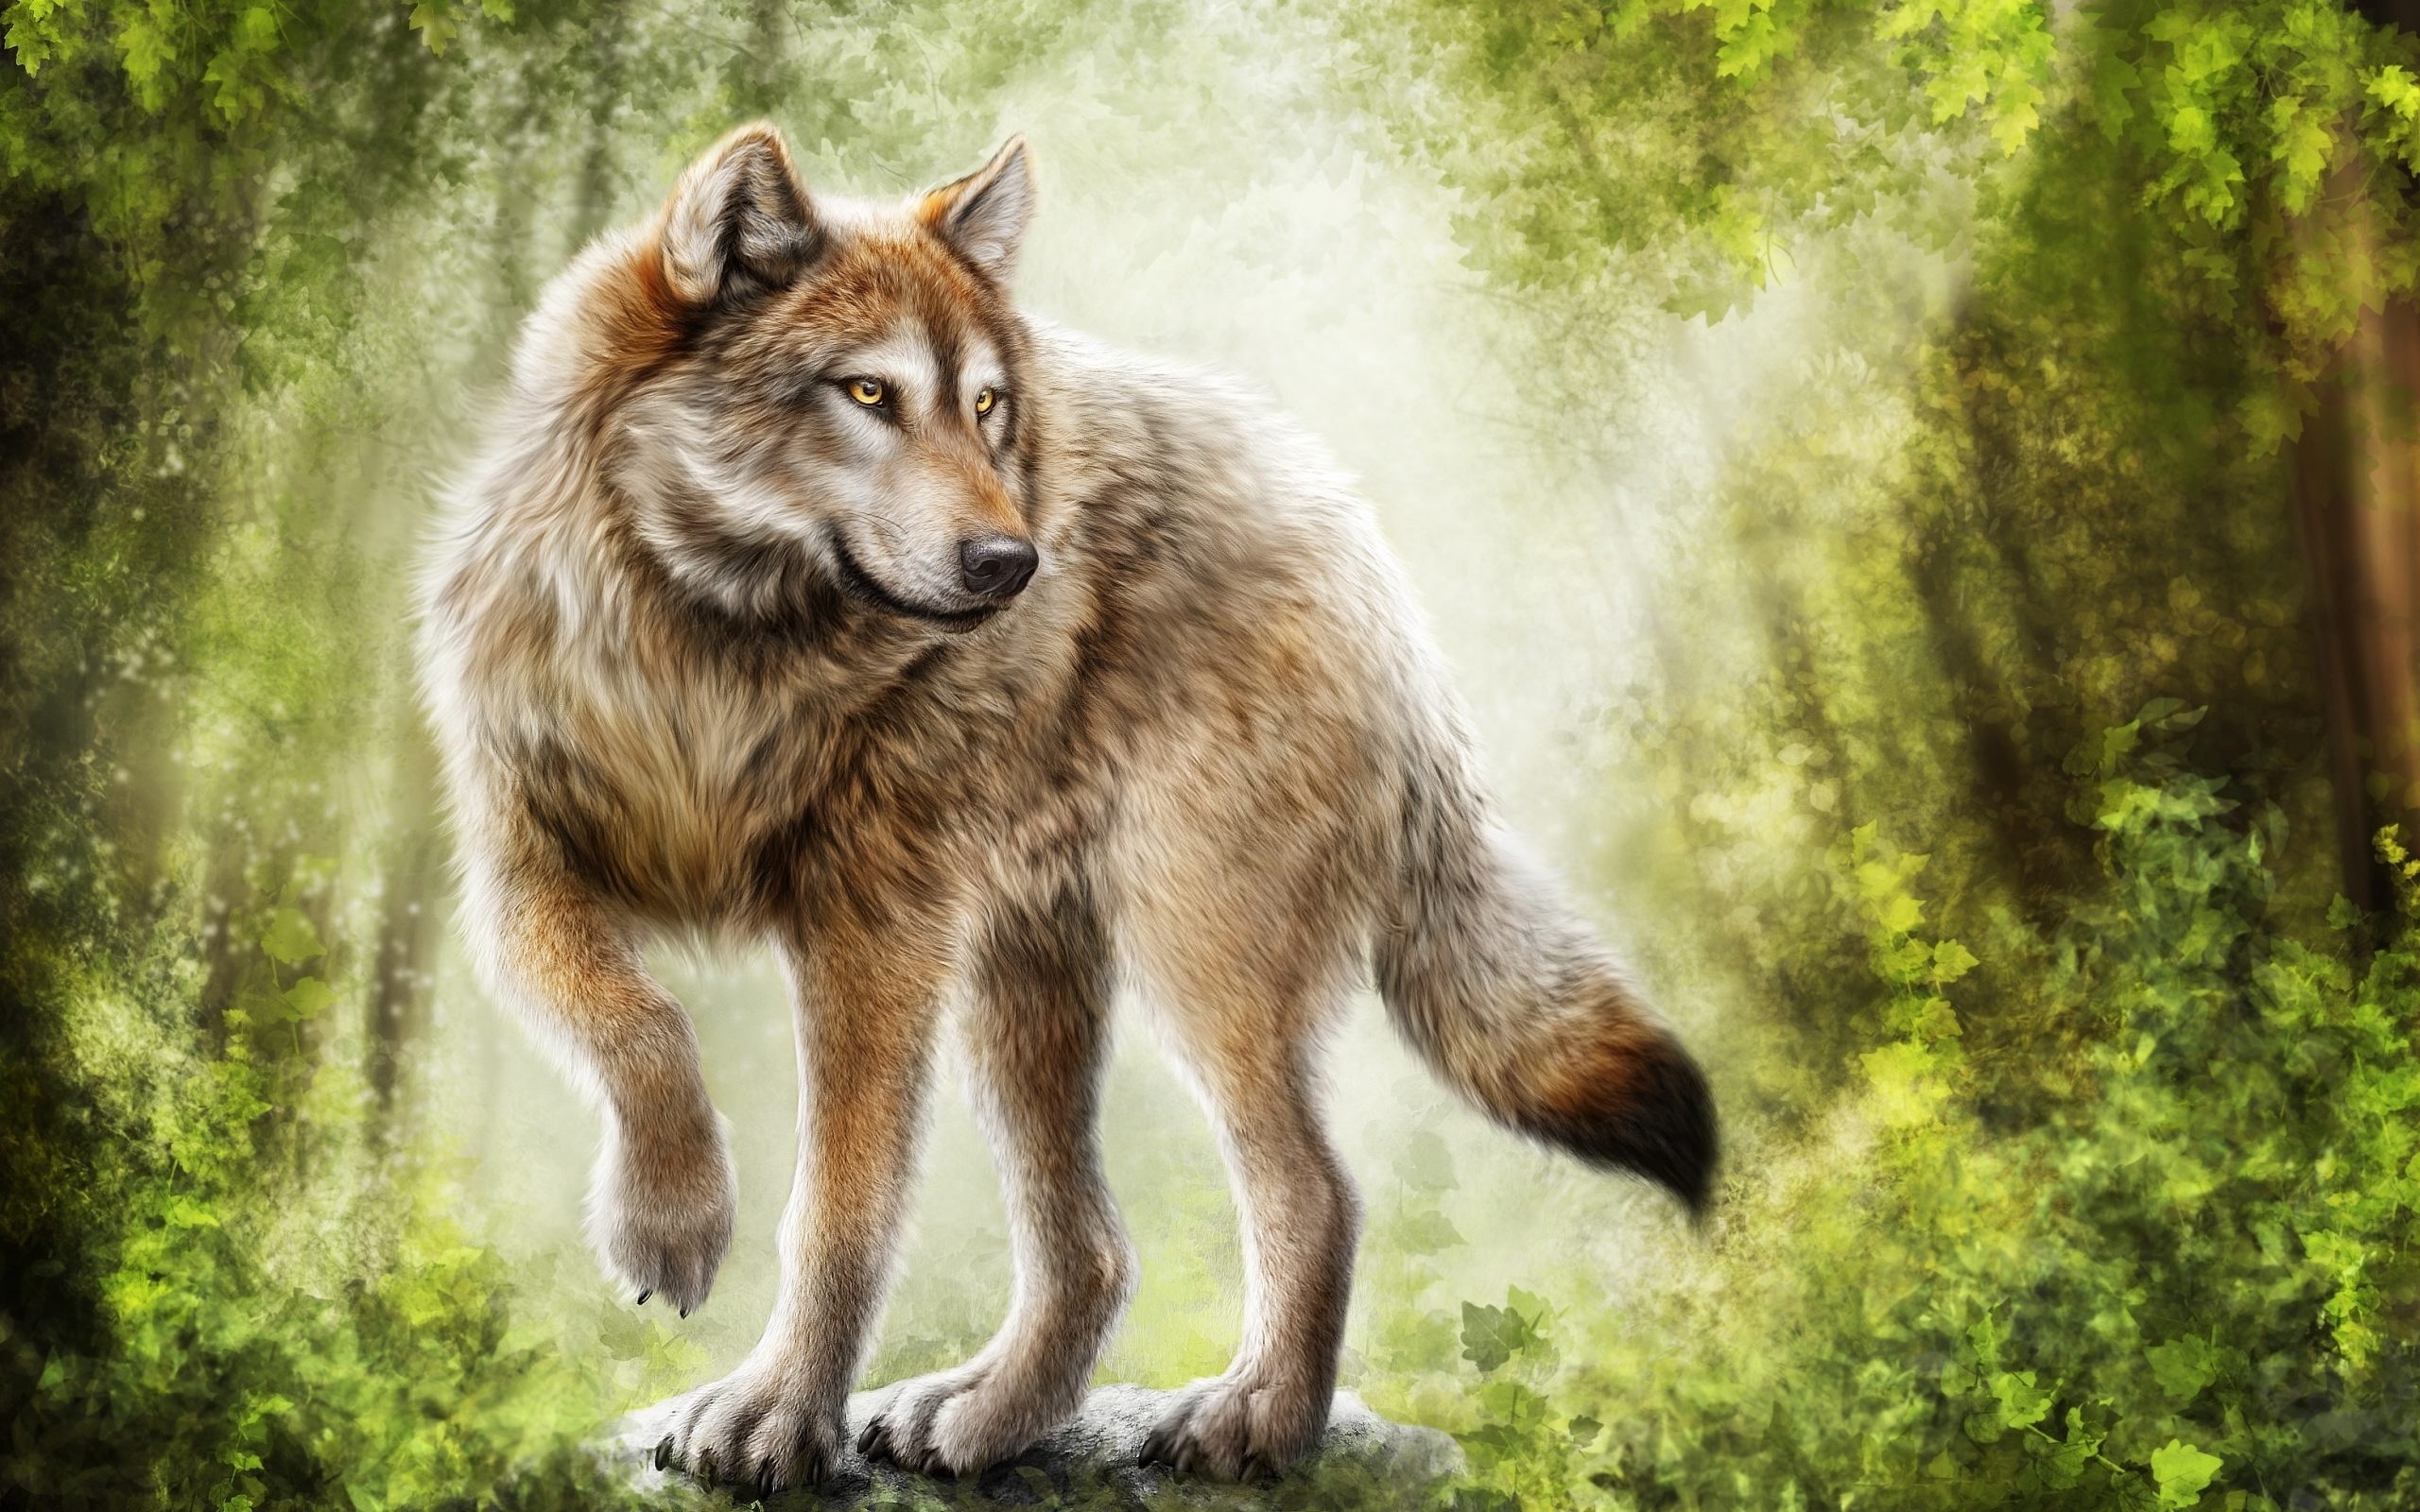 Gray Wolf: Predators of medium and large hooved mammals, Keen senses of smell, hearing and vision. 2560x1600 HD Wallpaper.